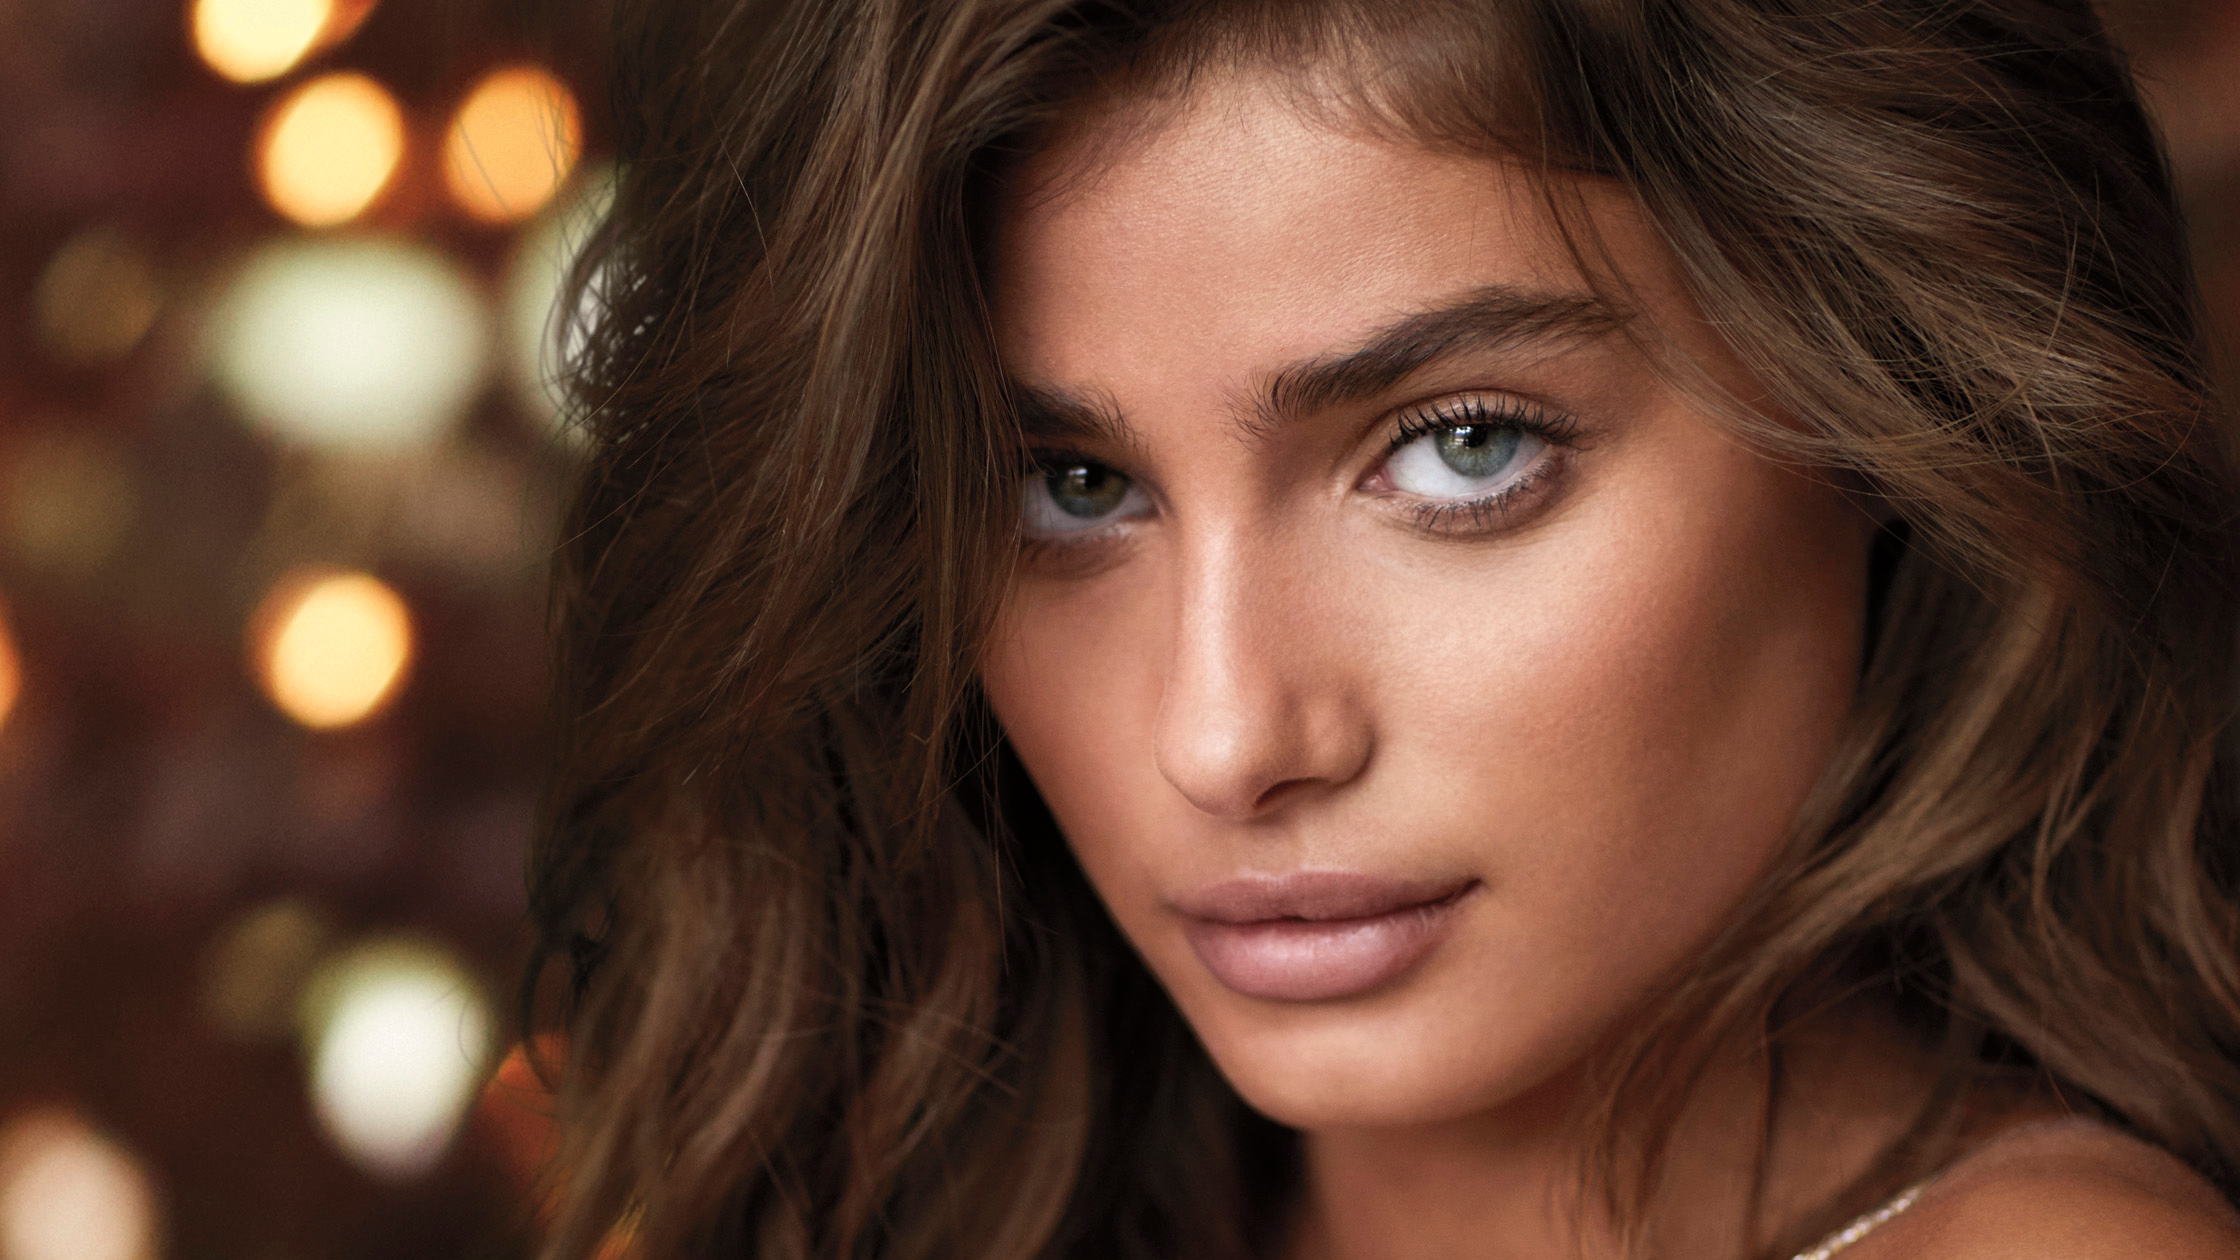 Taylor Hill 2019 New Wallpapers Hd Wallpapers 